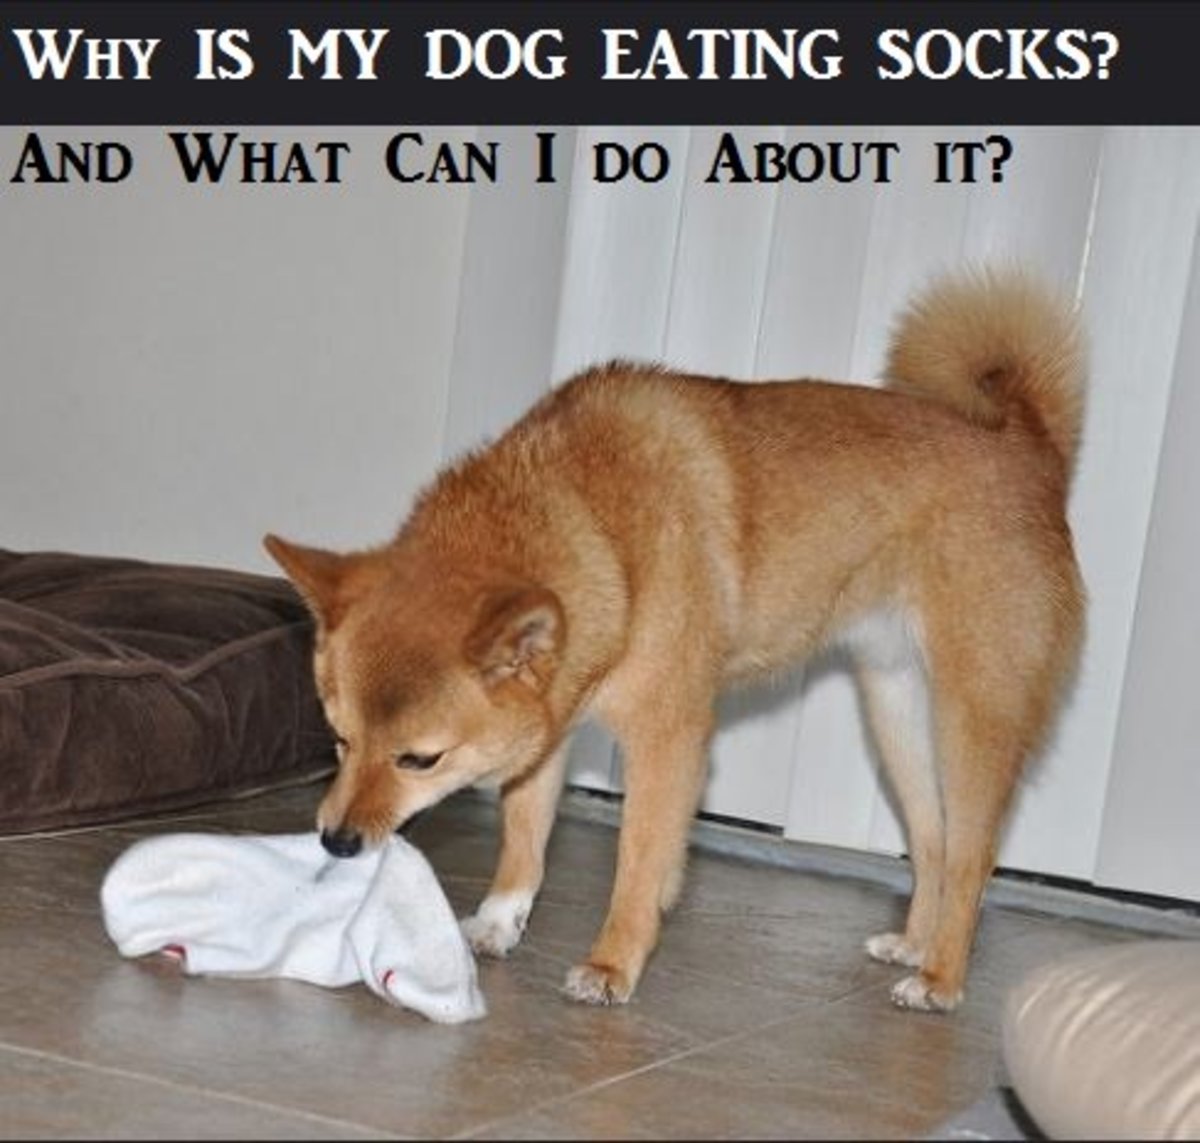 Why Does My Puppy Eat Socks